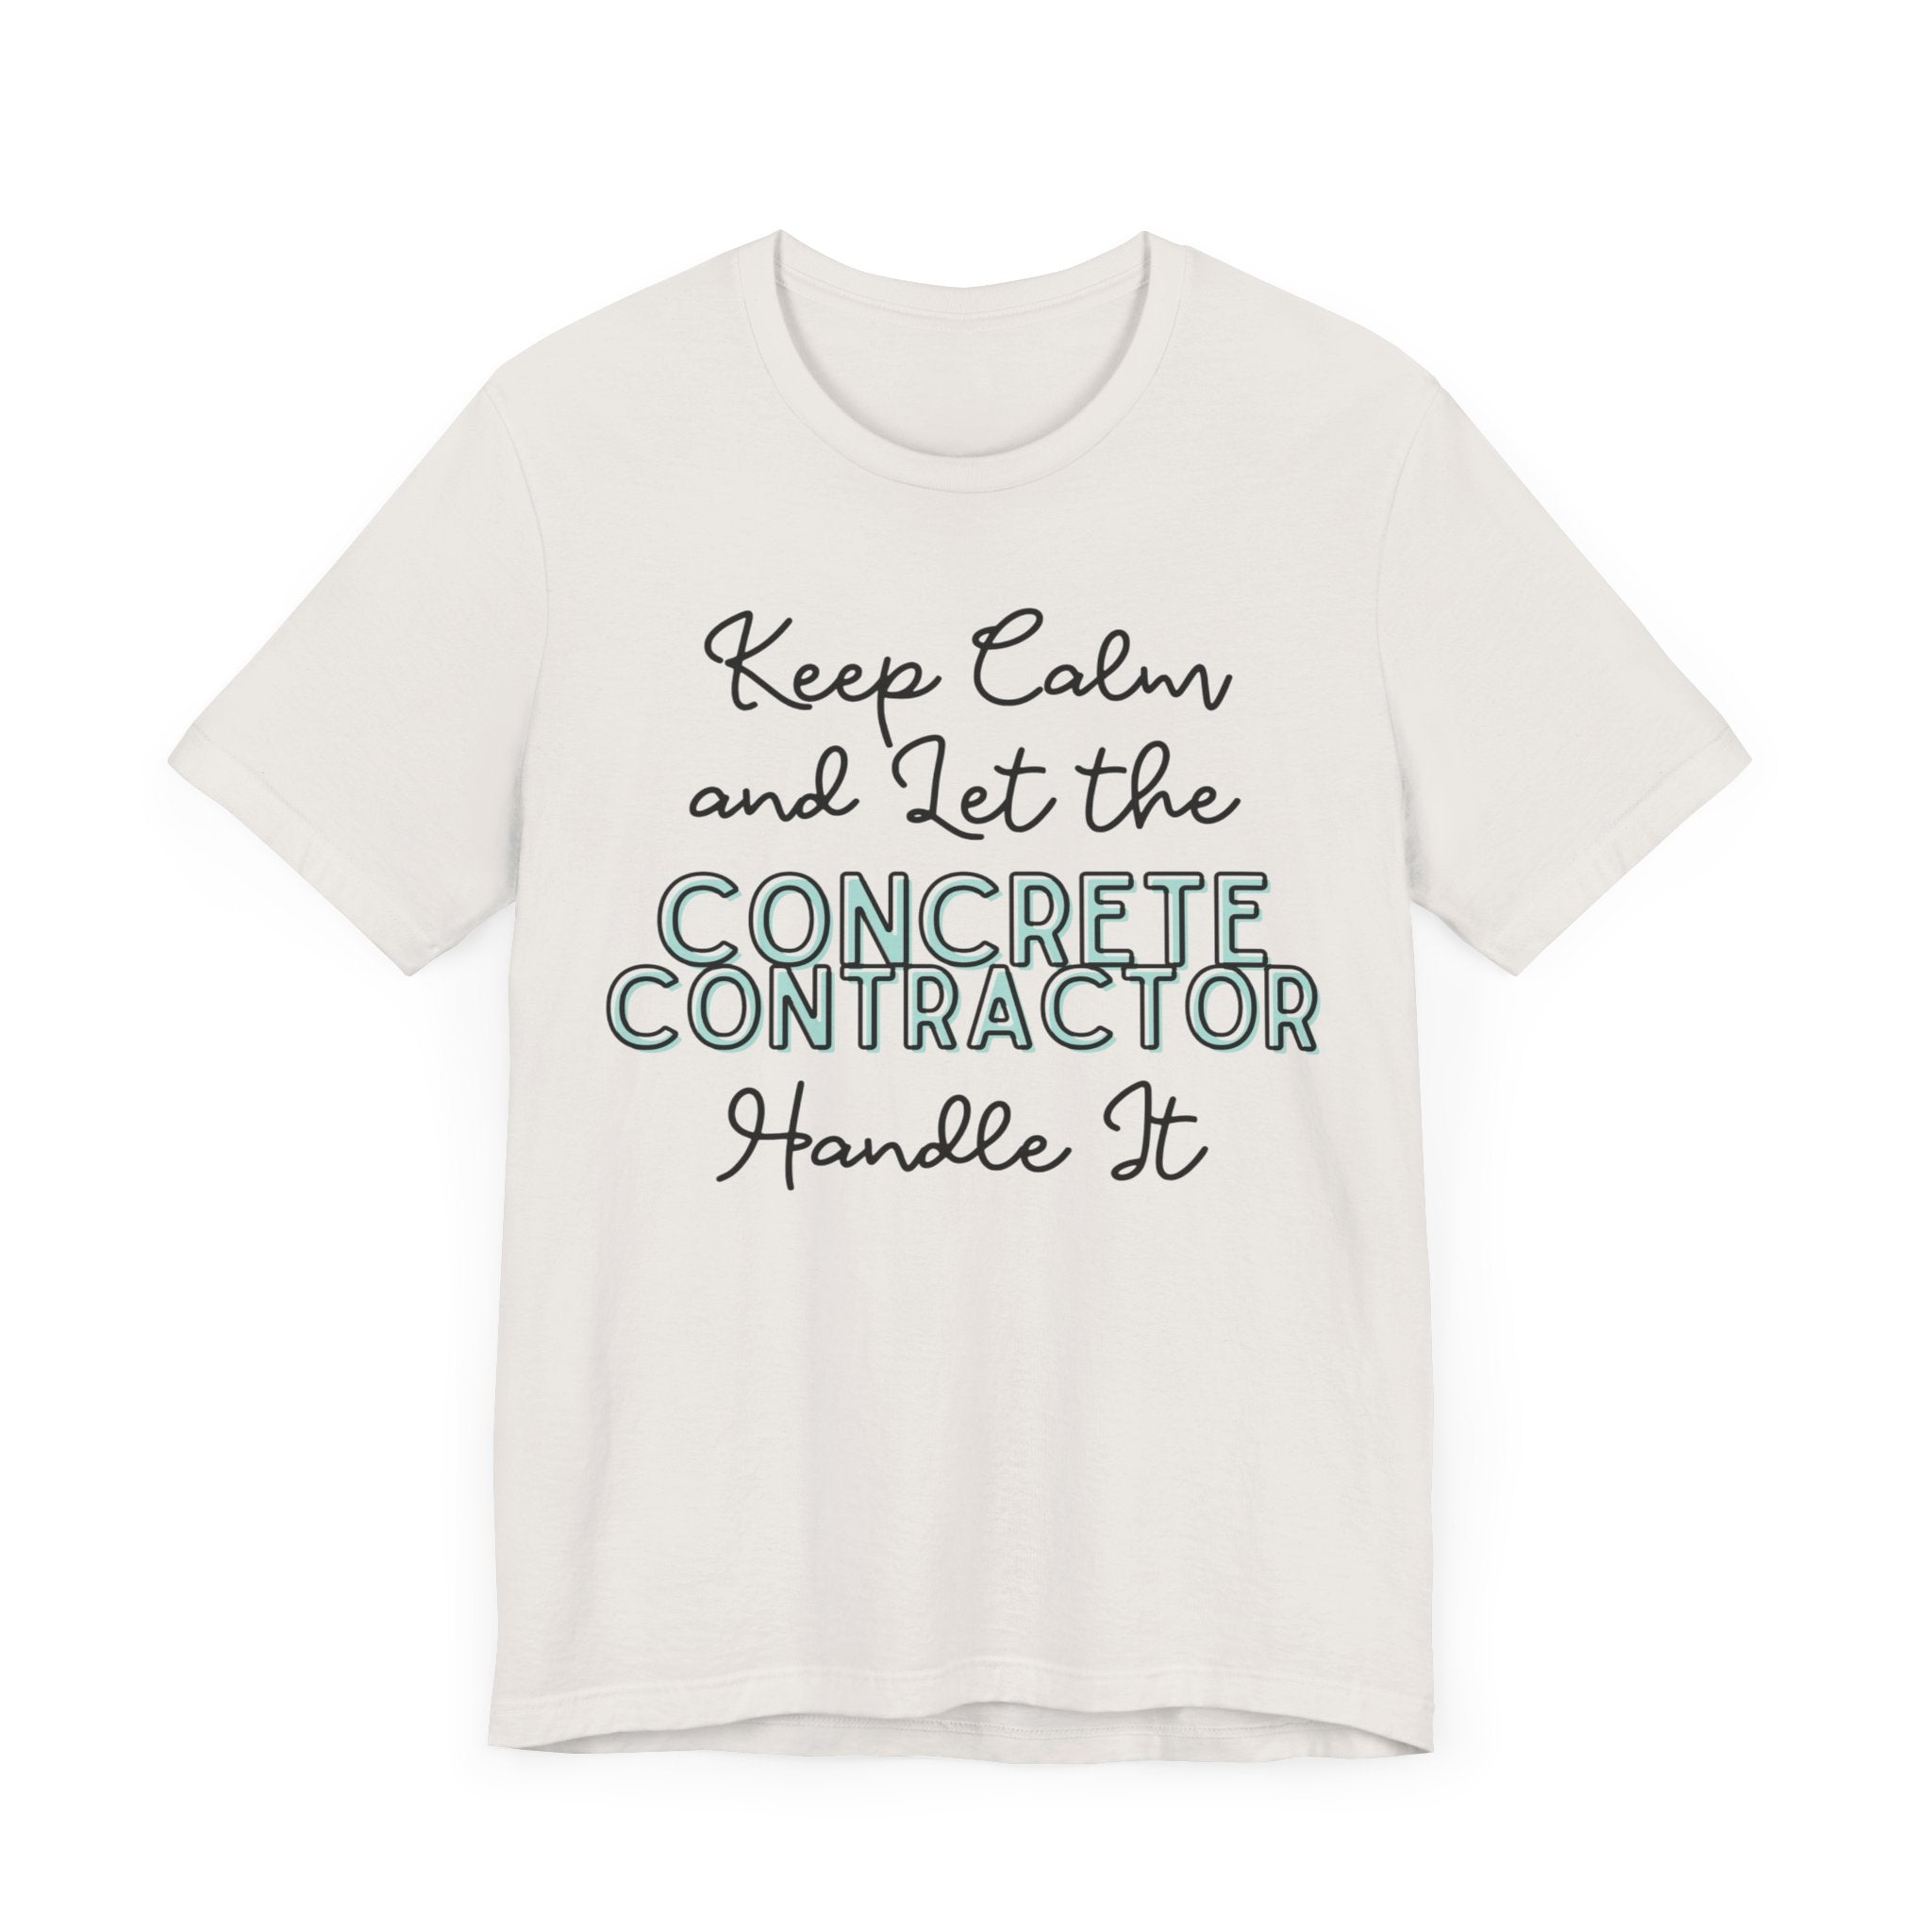 Keep Calm and let the Concrete Contractor handle It - Jersey Short Sleeve Tee